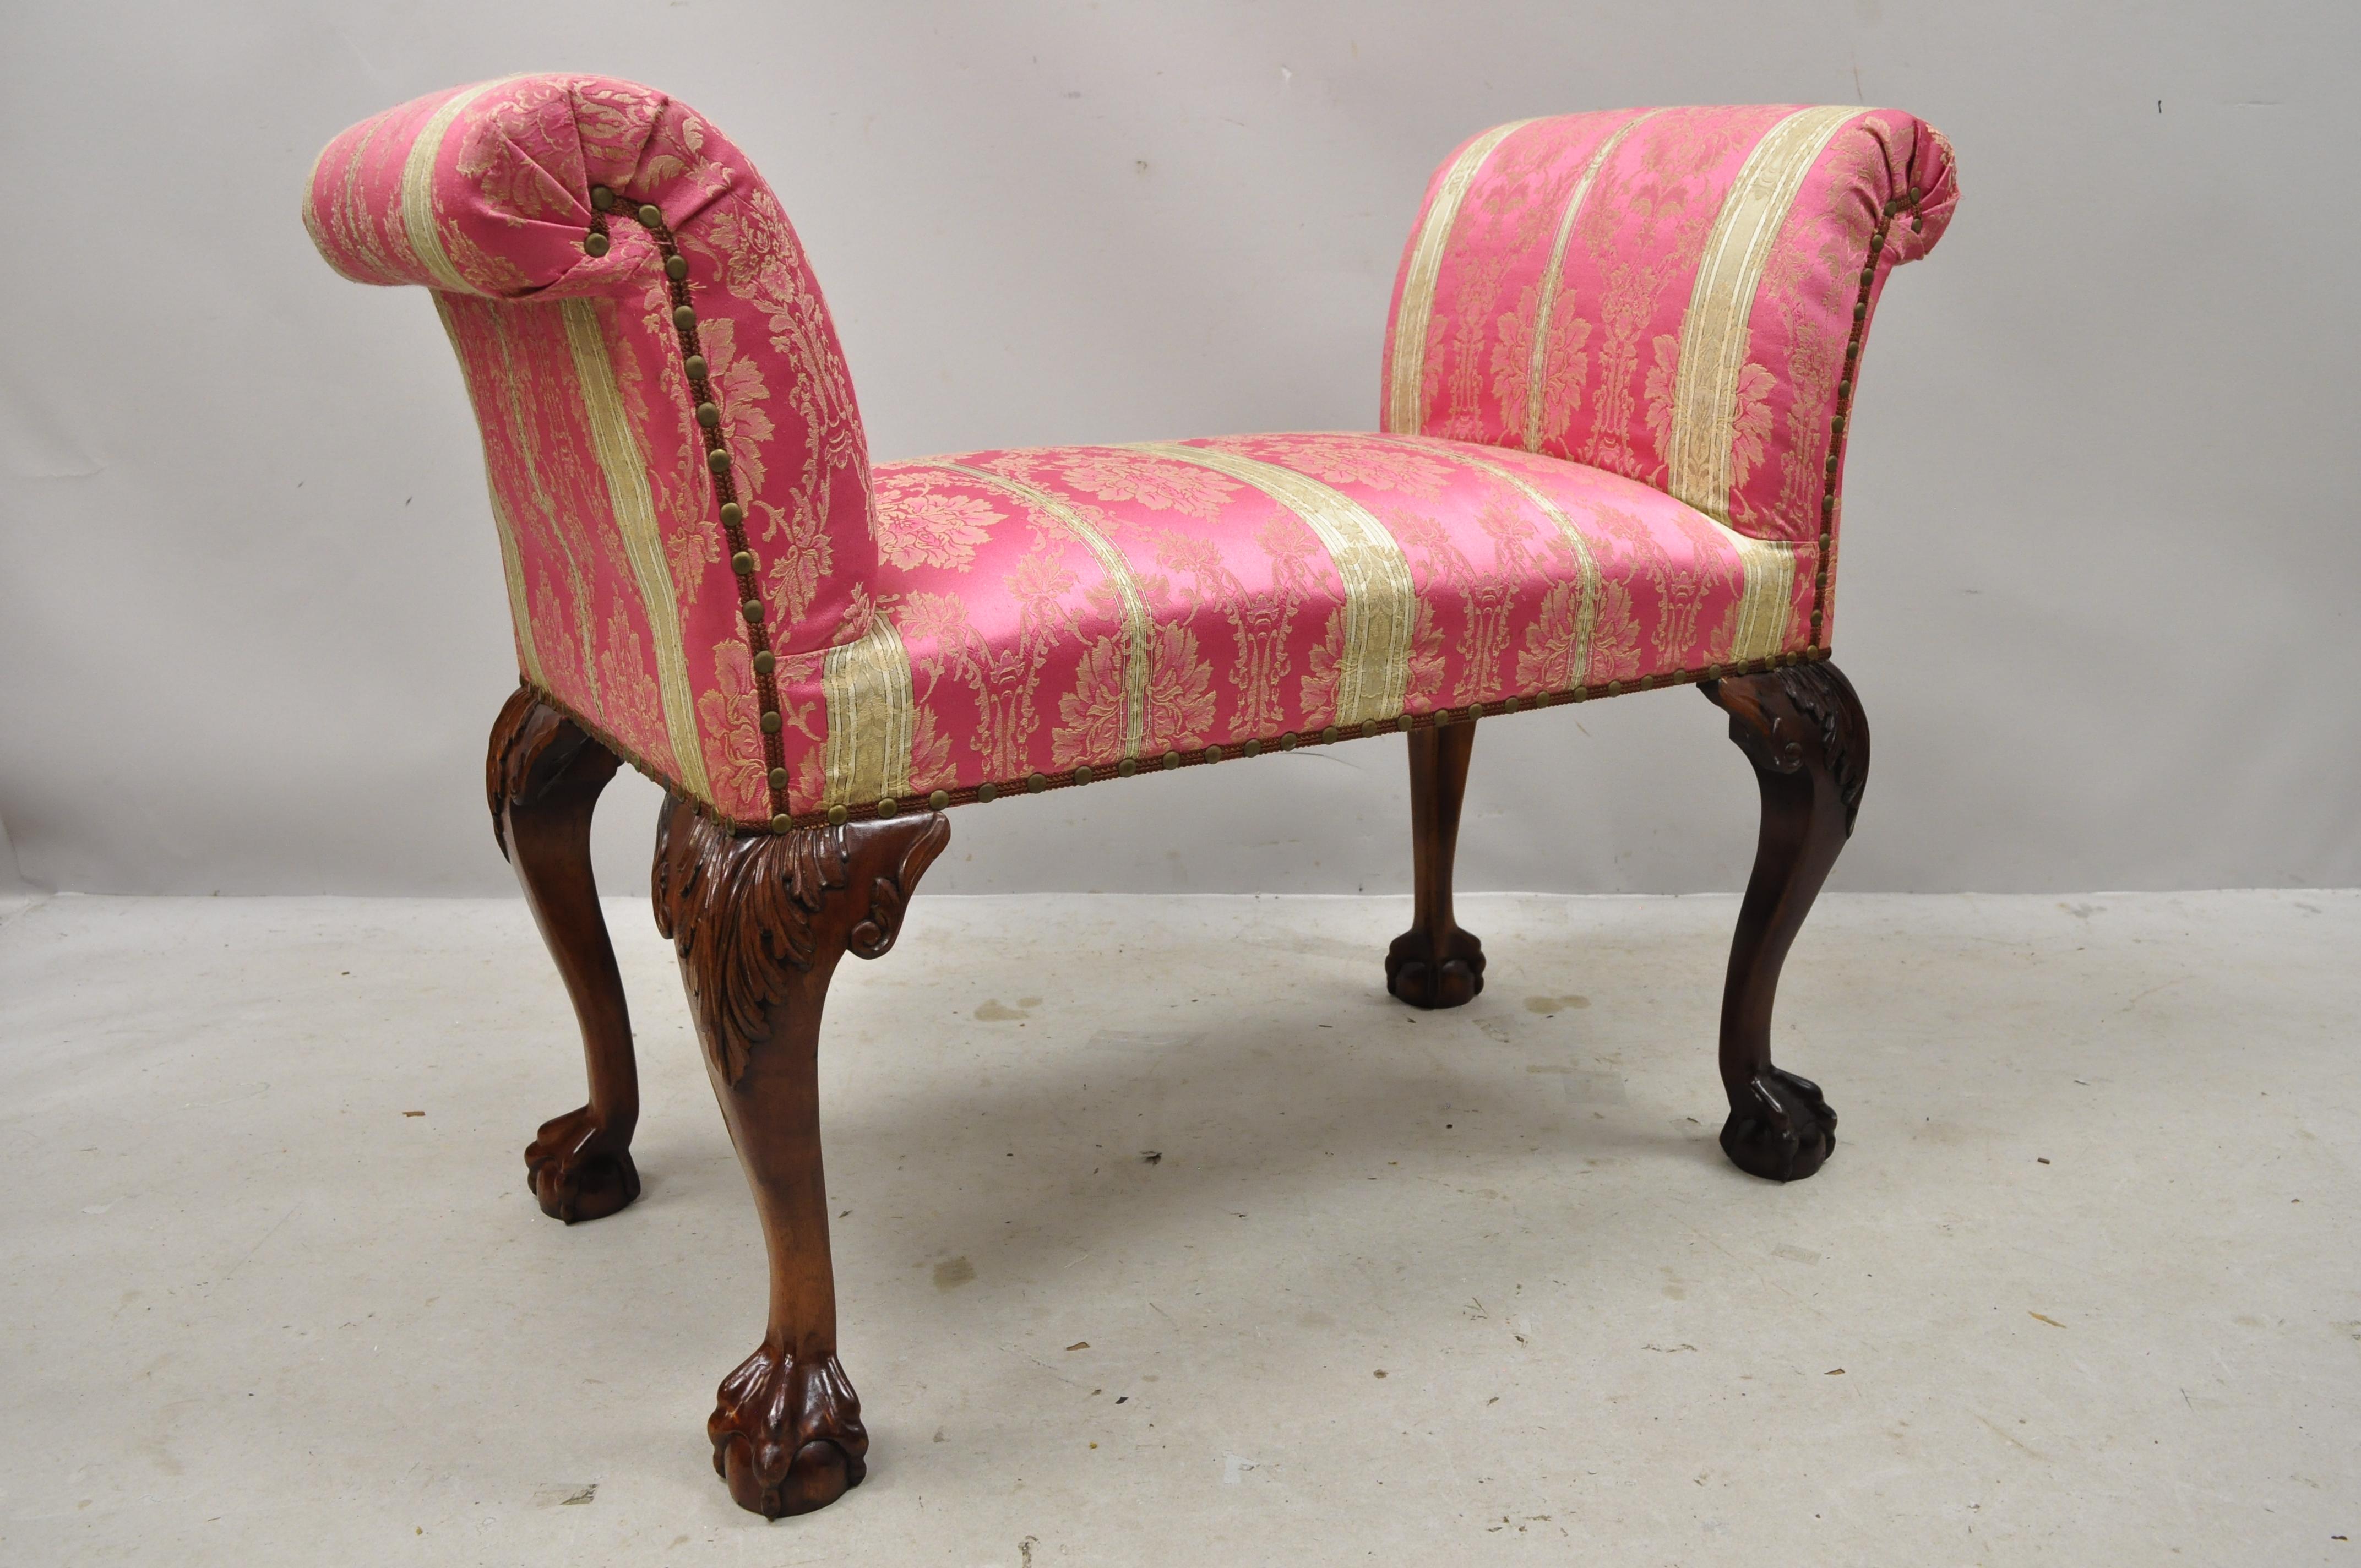 Paramount Antiques Inc Chippendale Mahogany Ball and Claw Pink Upholstered Bench 5